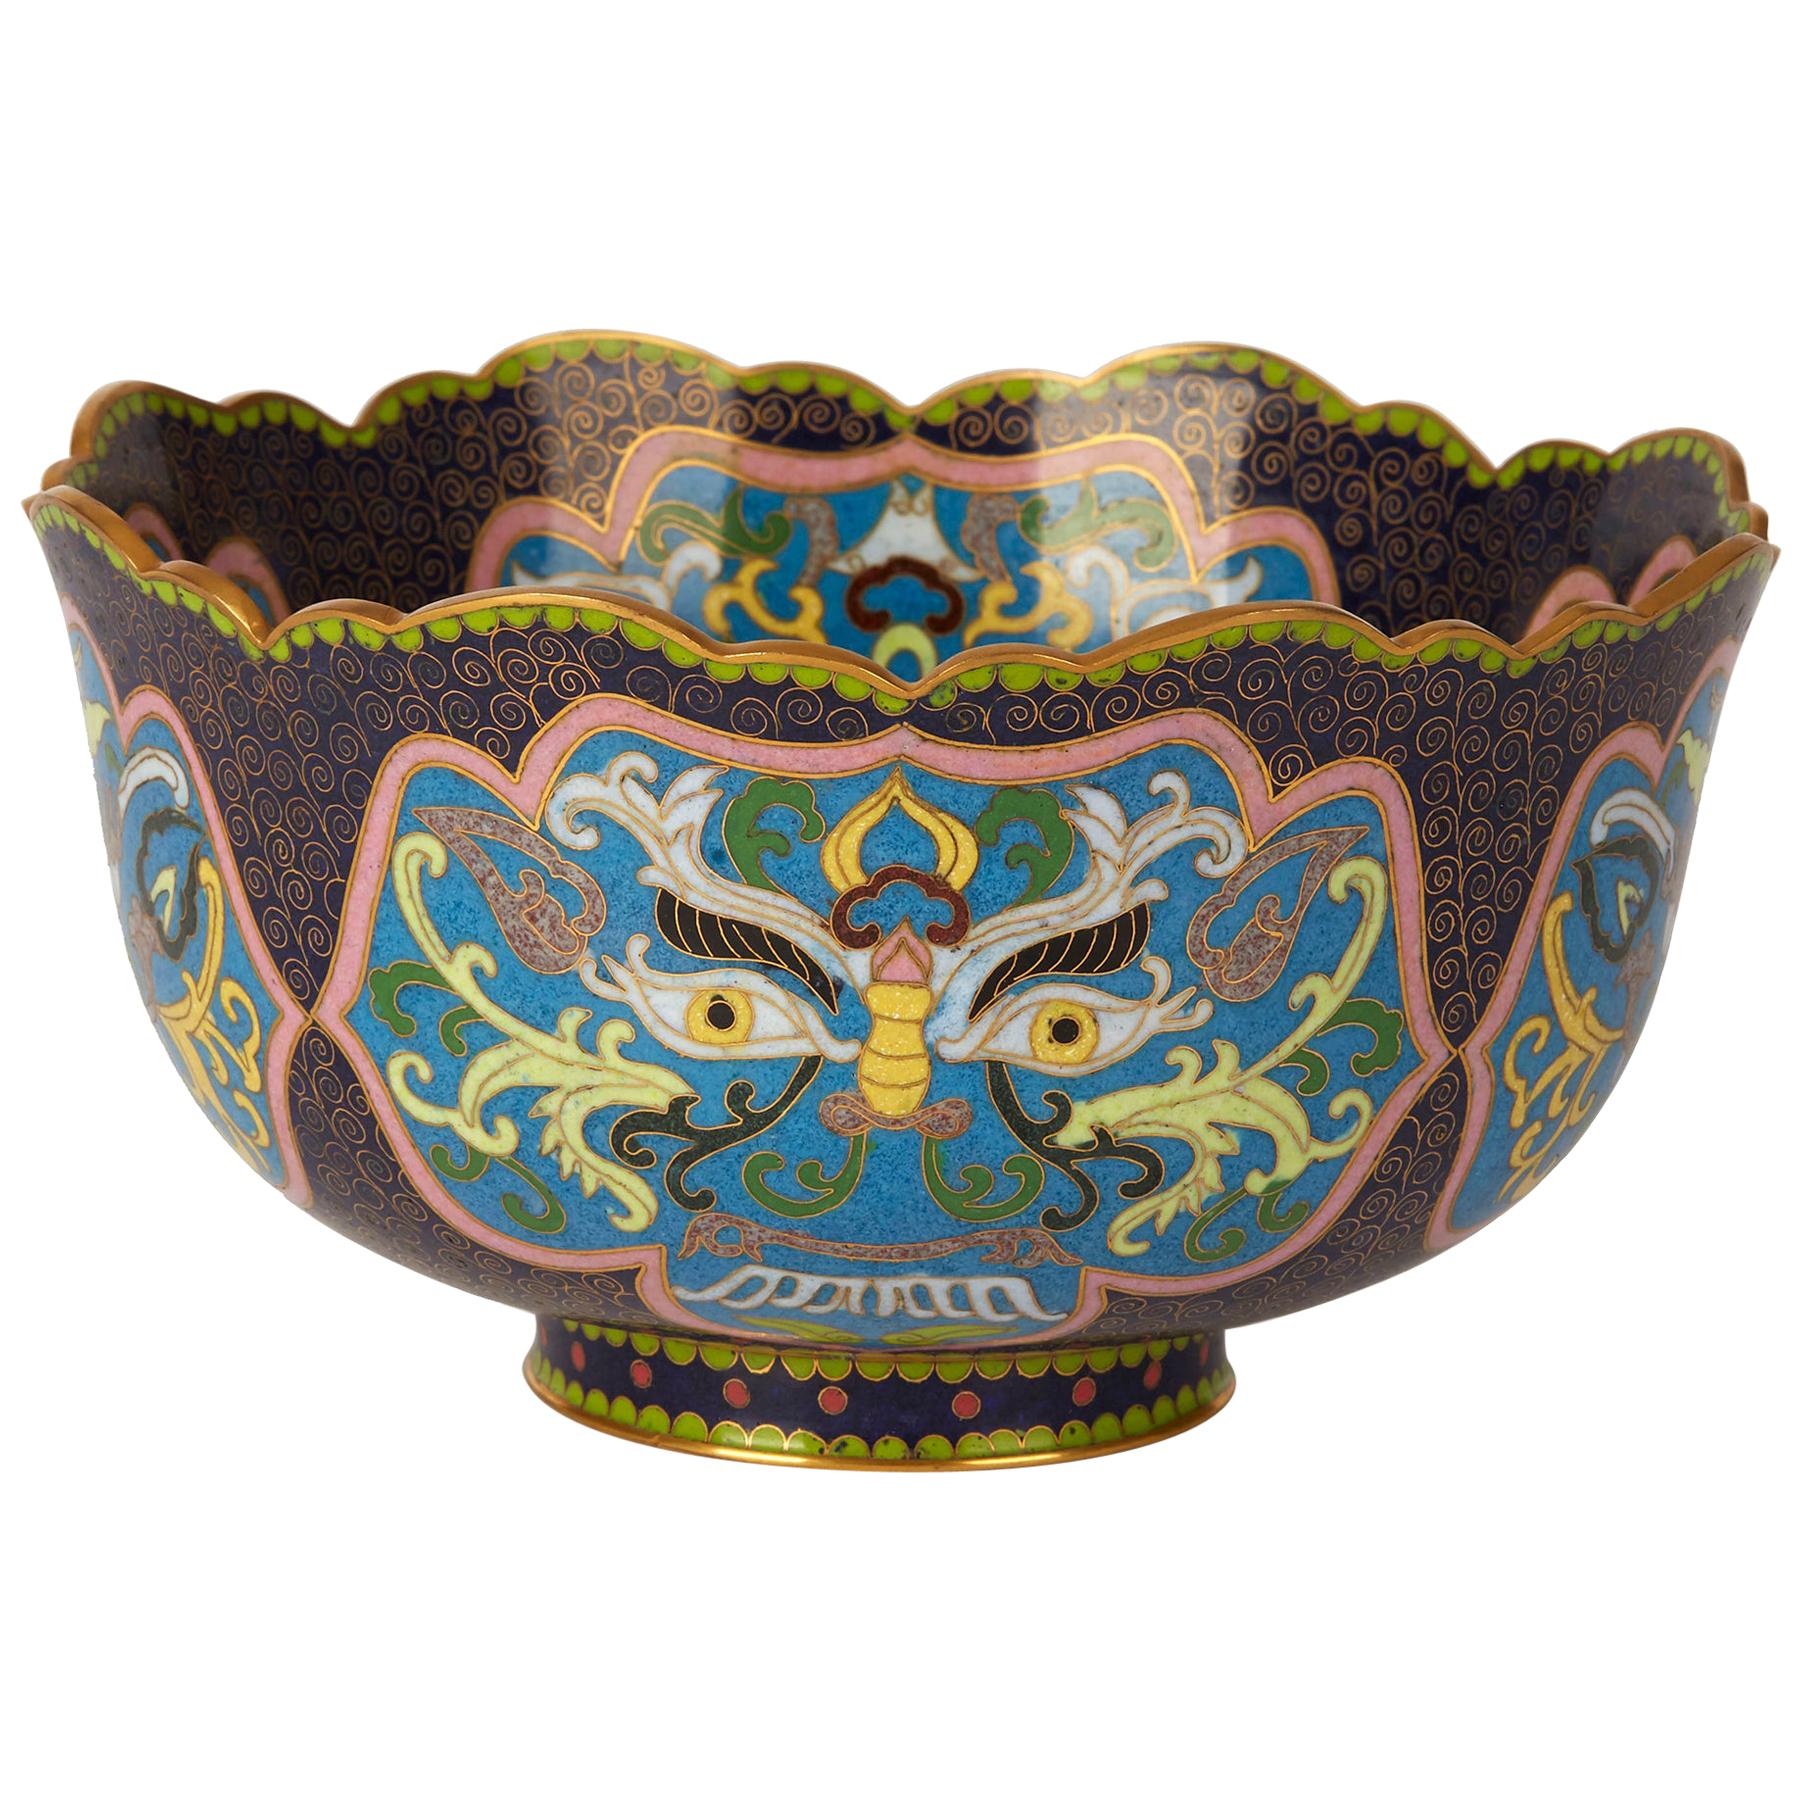 Vintage Chinese Republic Period Cloisonné Bowl, Early 20th Century For Sale